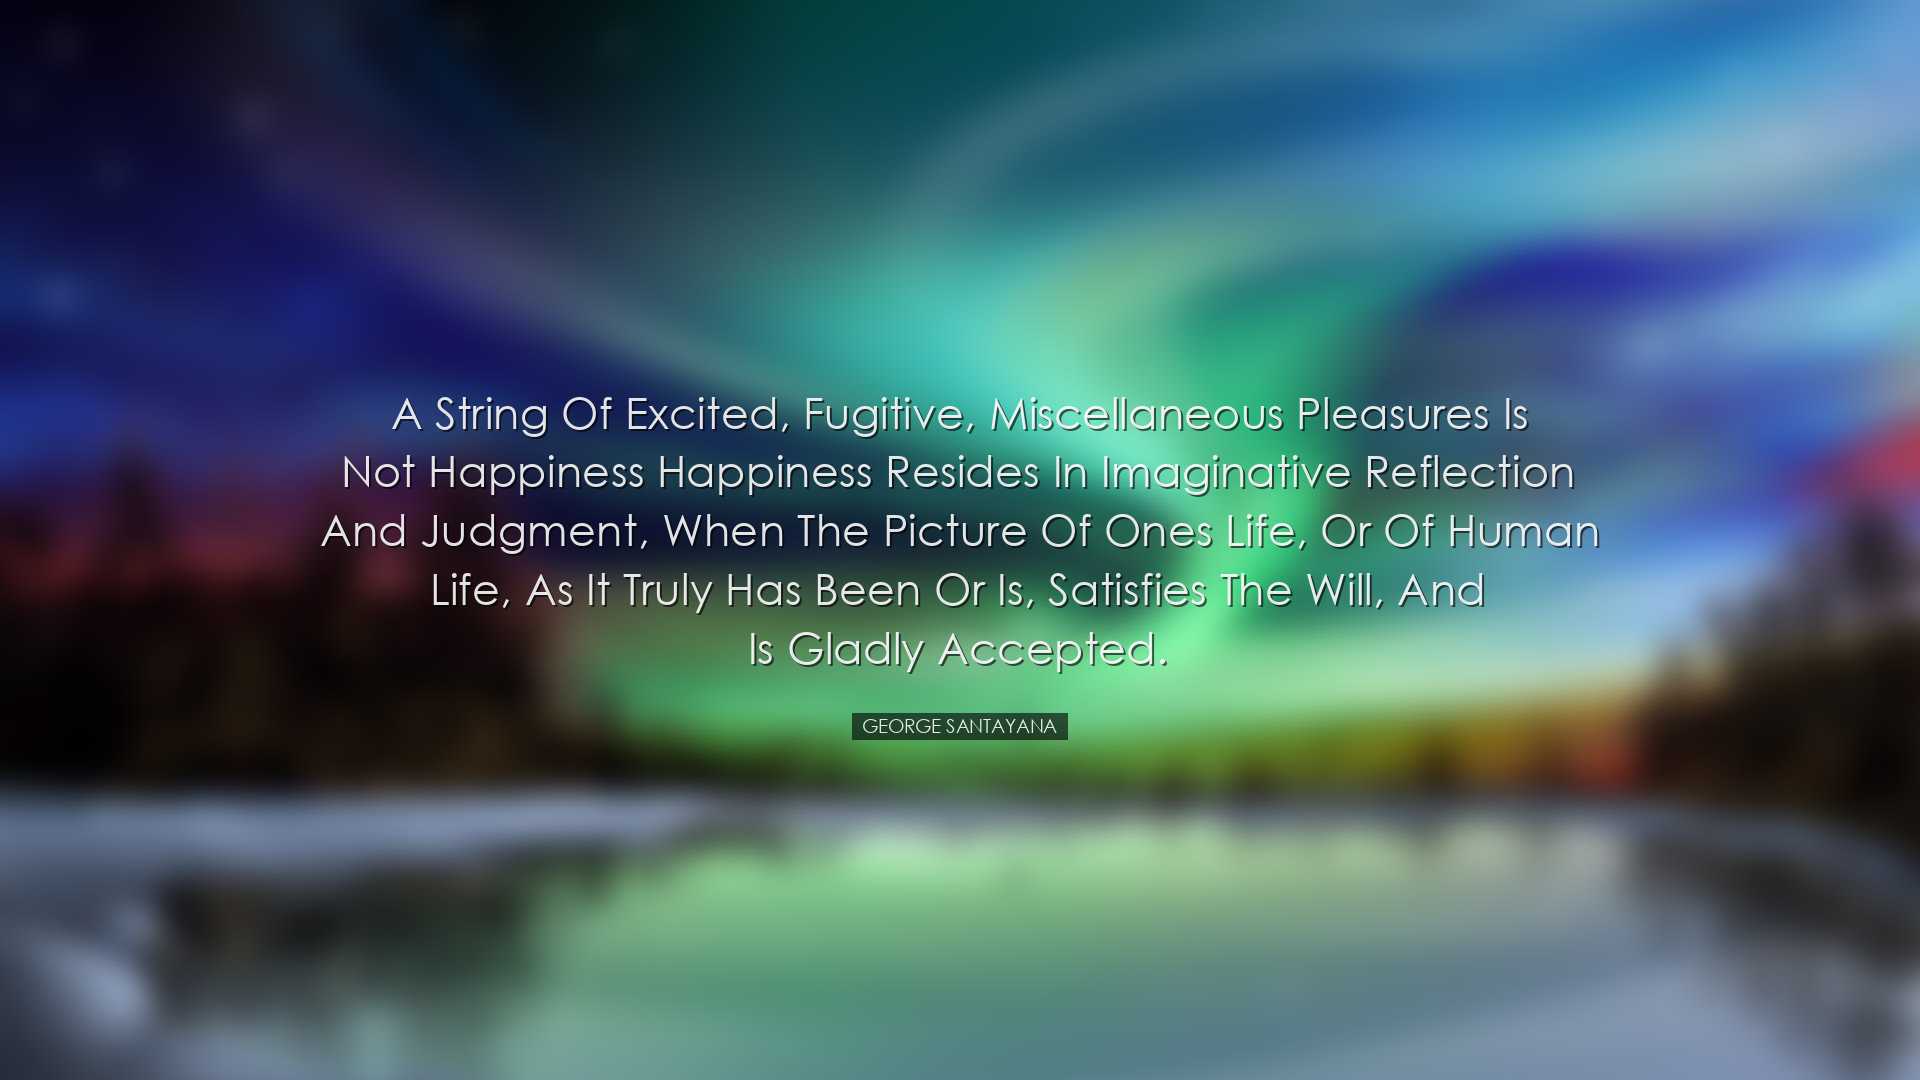 A string of excited, fugitive, miscellaneous pleasures is not happ